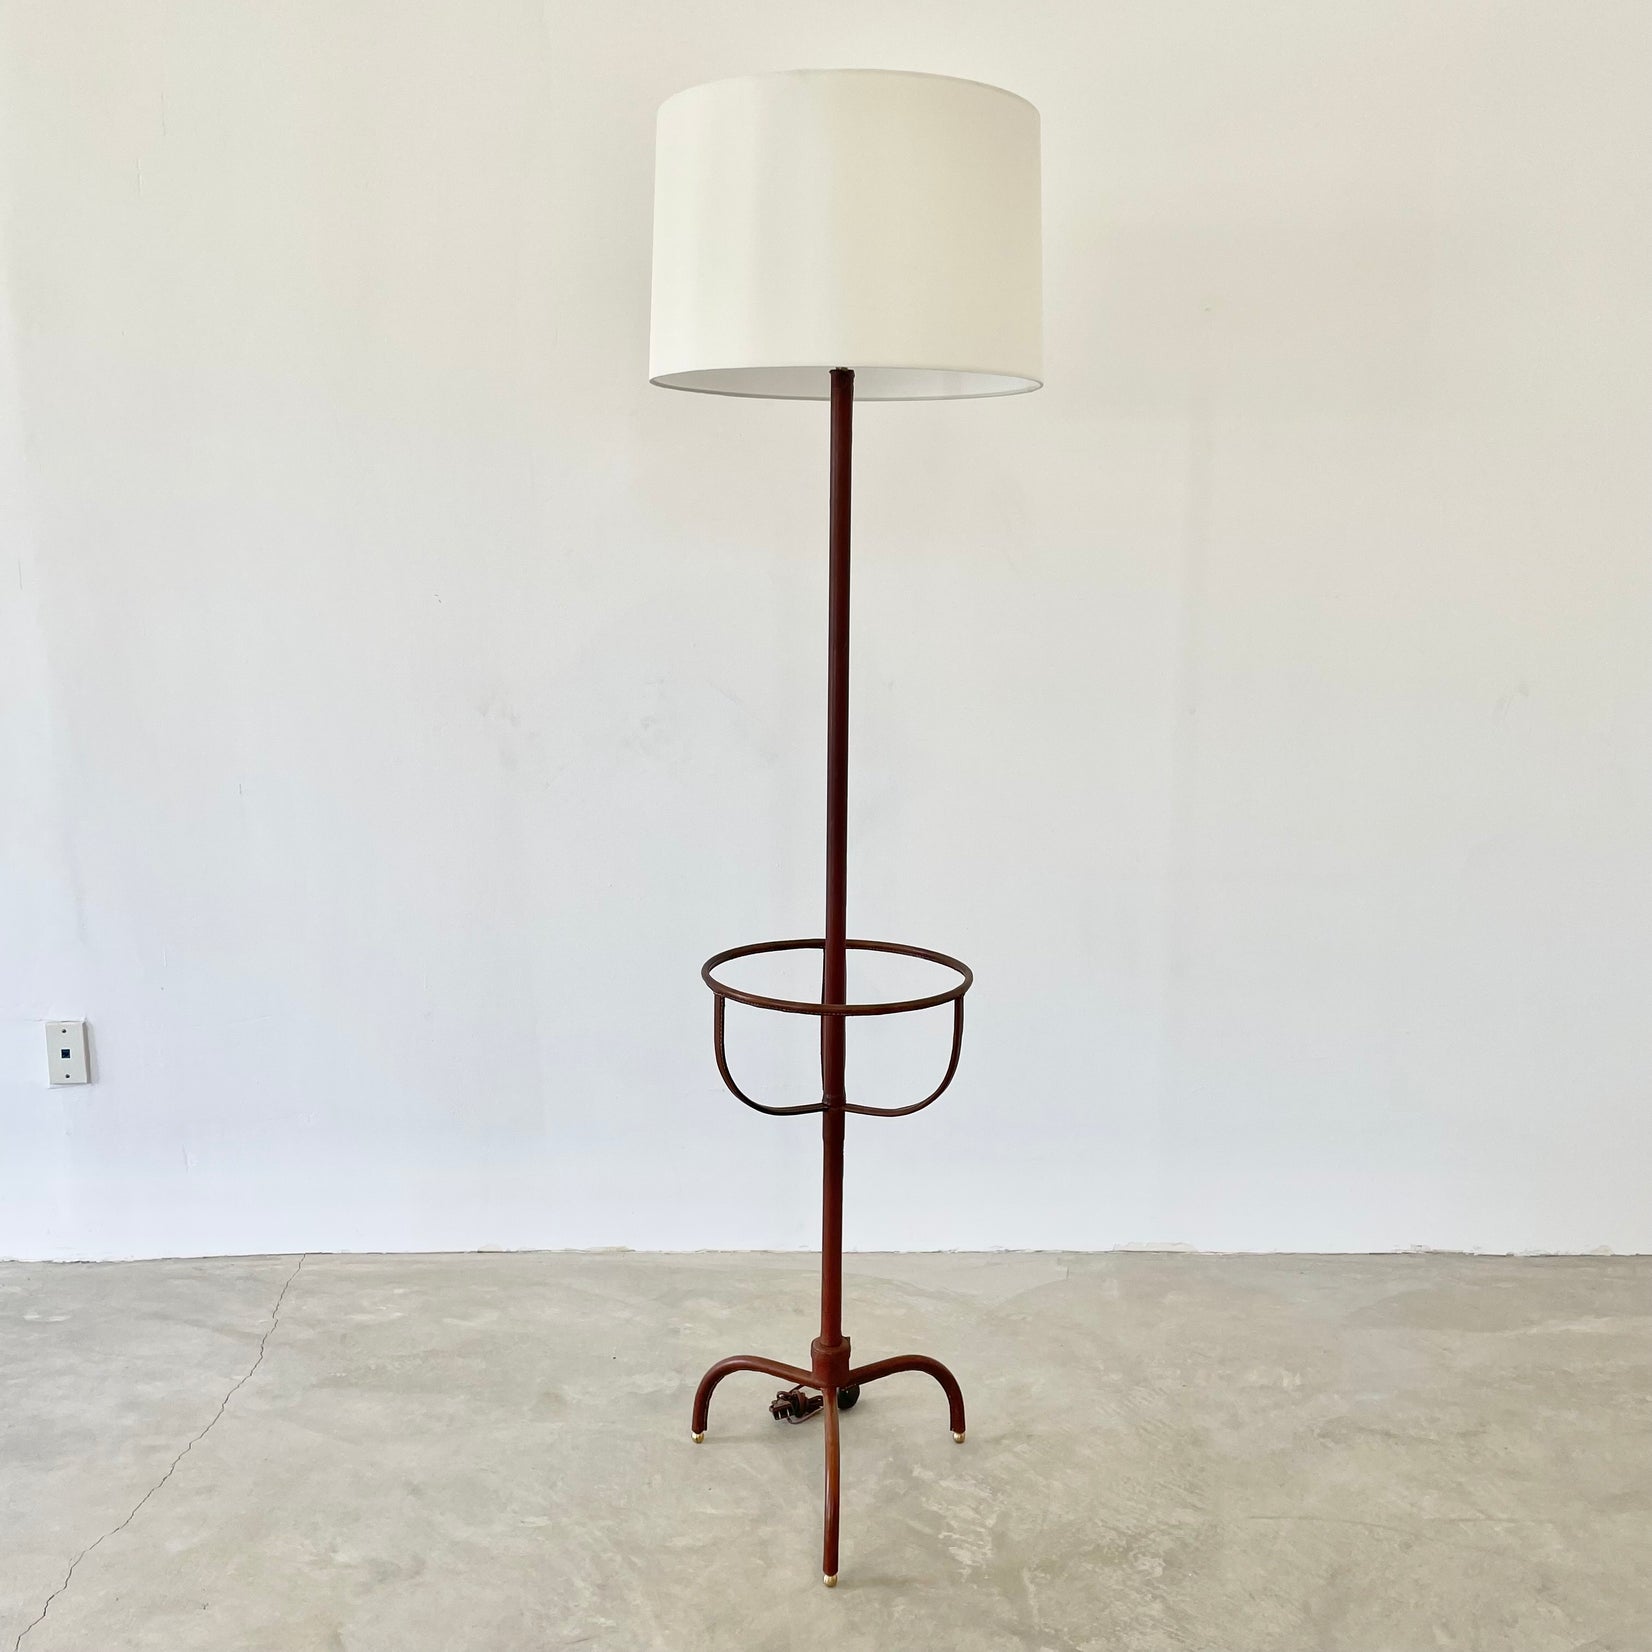 Jacques Adnet Floor Lamp in Saddle Leather, 1950s France